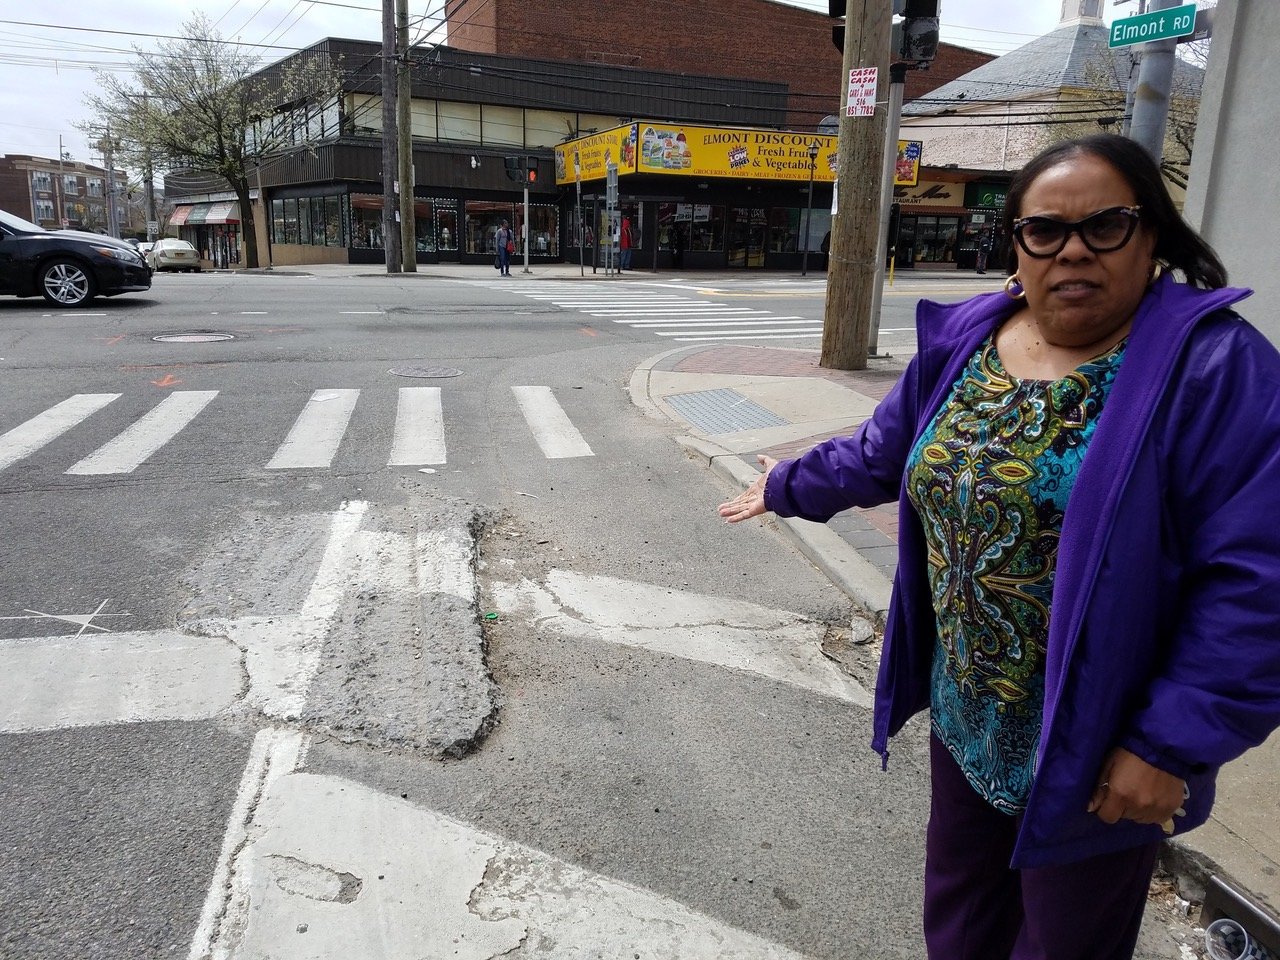 Elmont community leader Claudine Hall said that necessary repairs were neglected on Elmont Road because of the focus on implementing the Shot Spotter program.